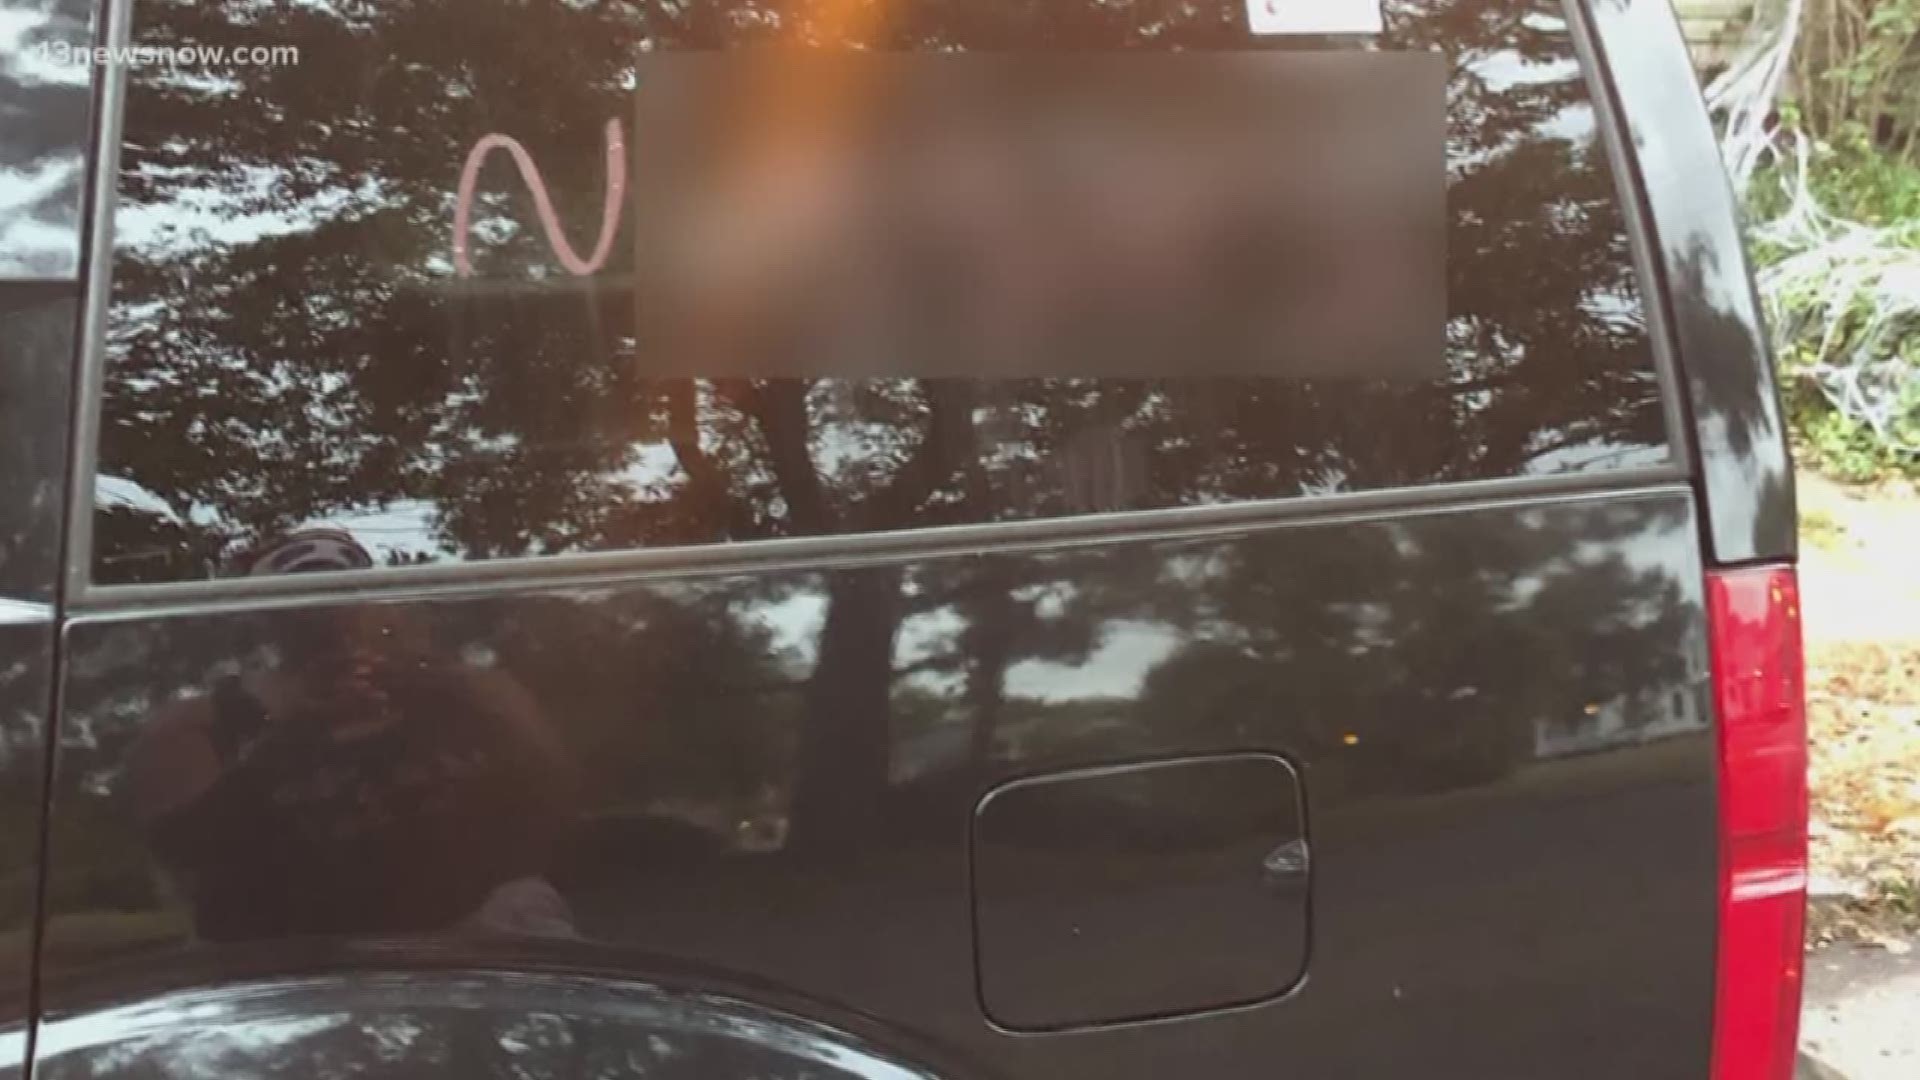 The Norfolk Police Department is investigating a hate crime written on a woman's car. The impacted couple is speaking out about the incident at Colonial Place.